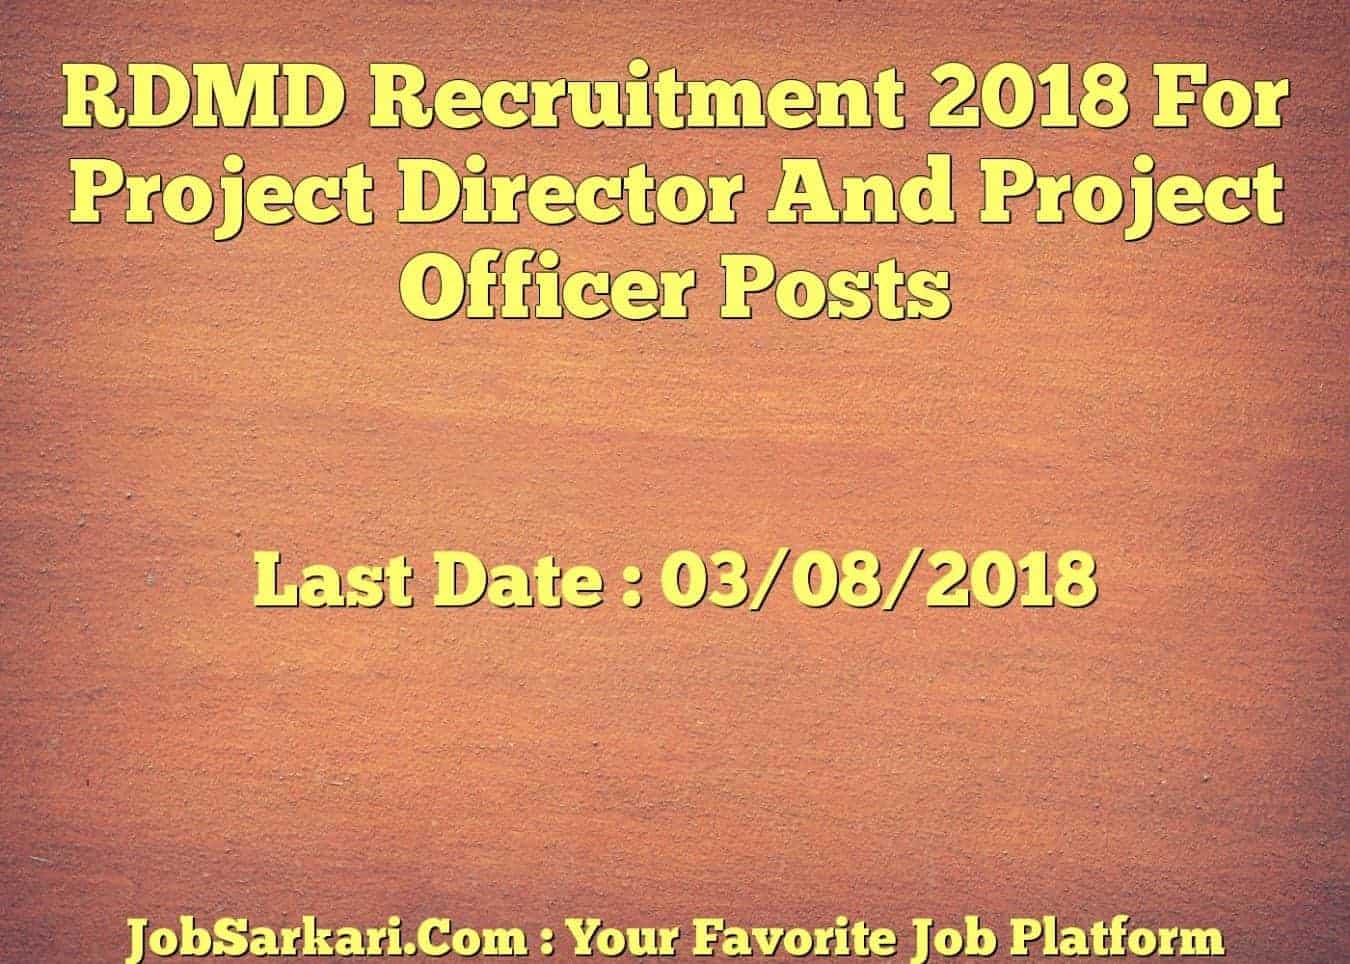 RDMD Recruitment 2018 For Project Director And Project Officer Posts